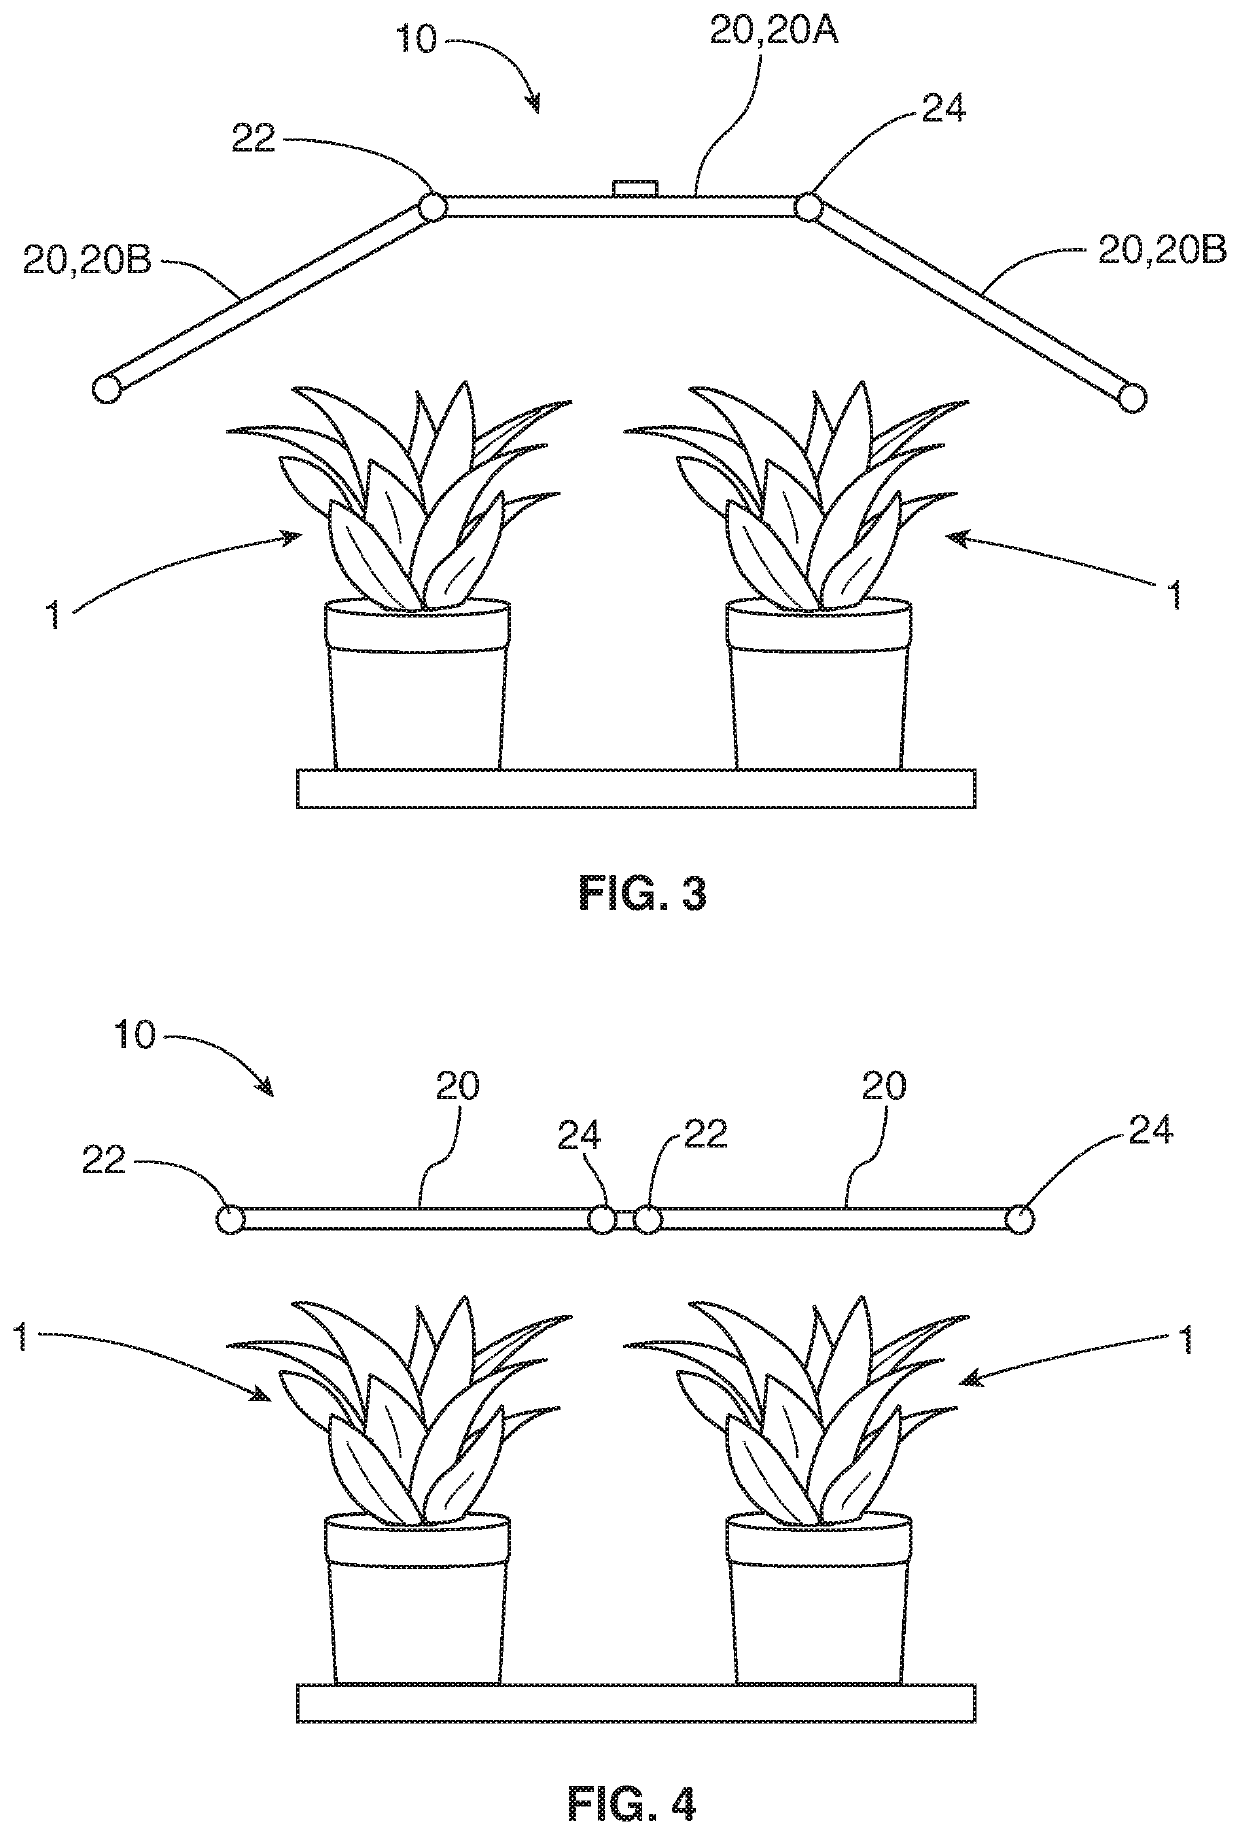 Grow light assembly with secondary light modules angularly movable relative to primary light modules